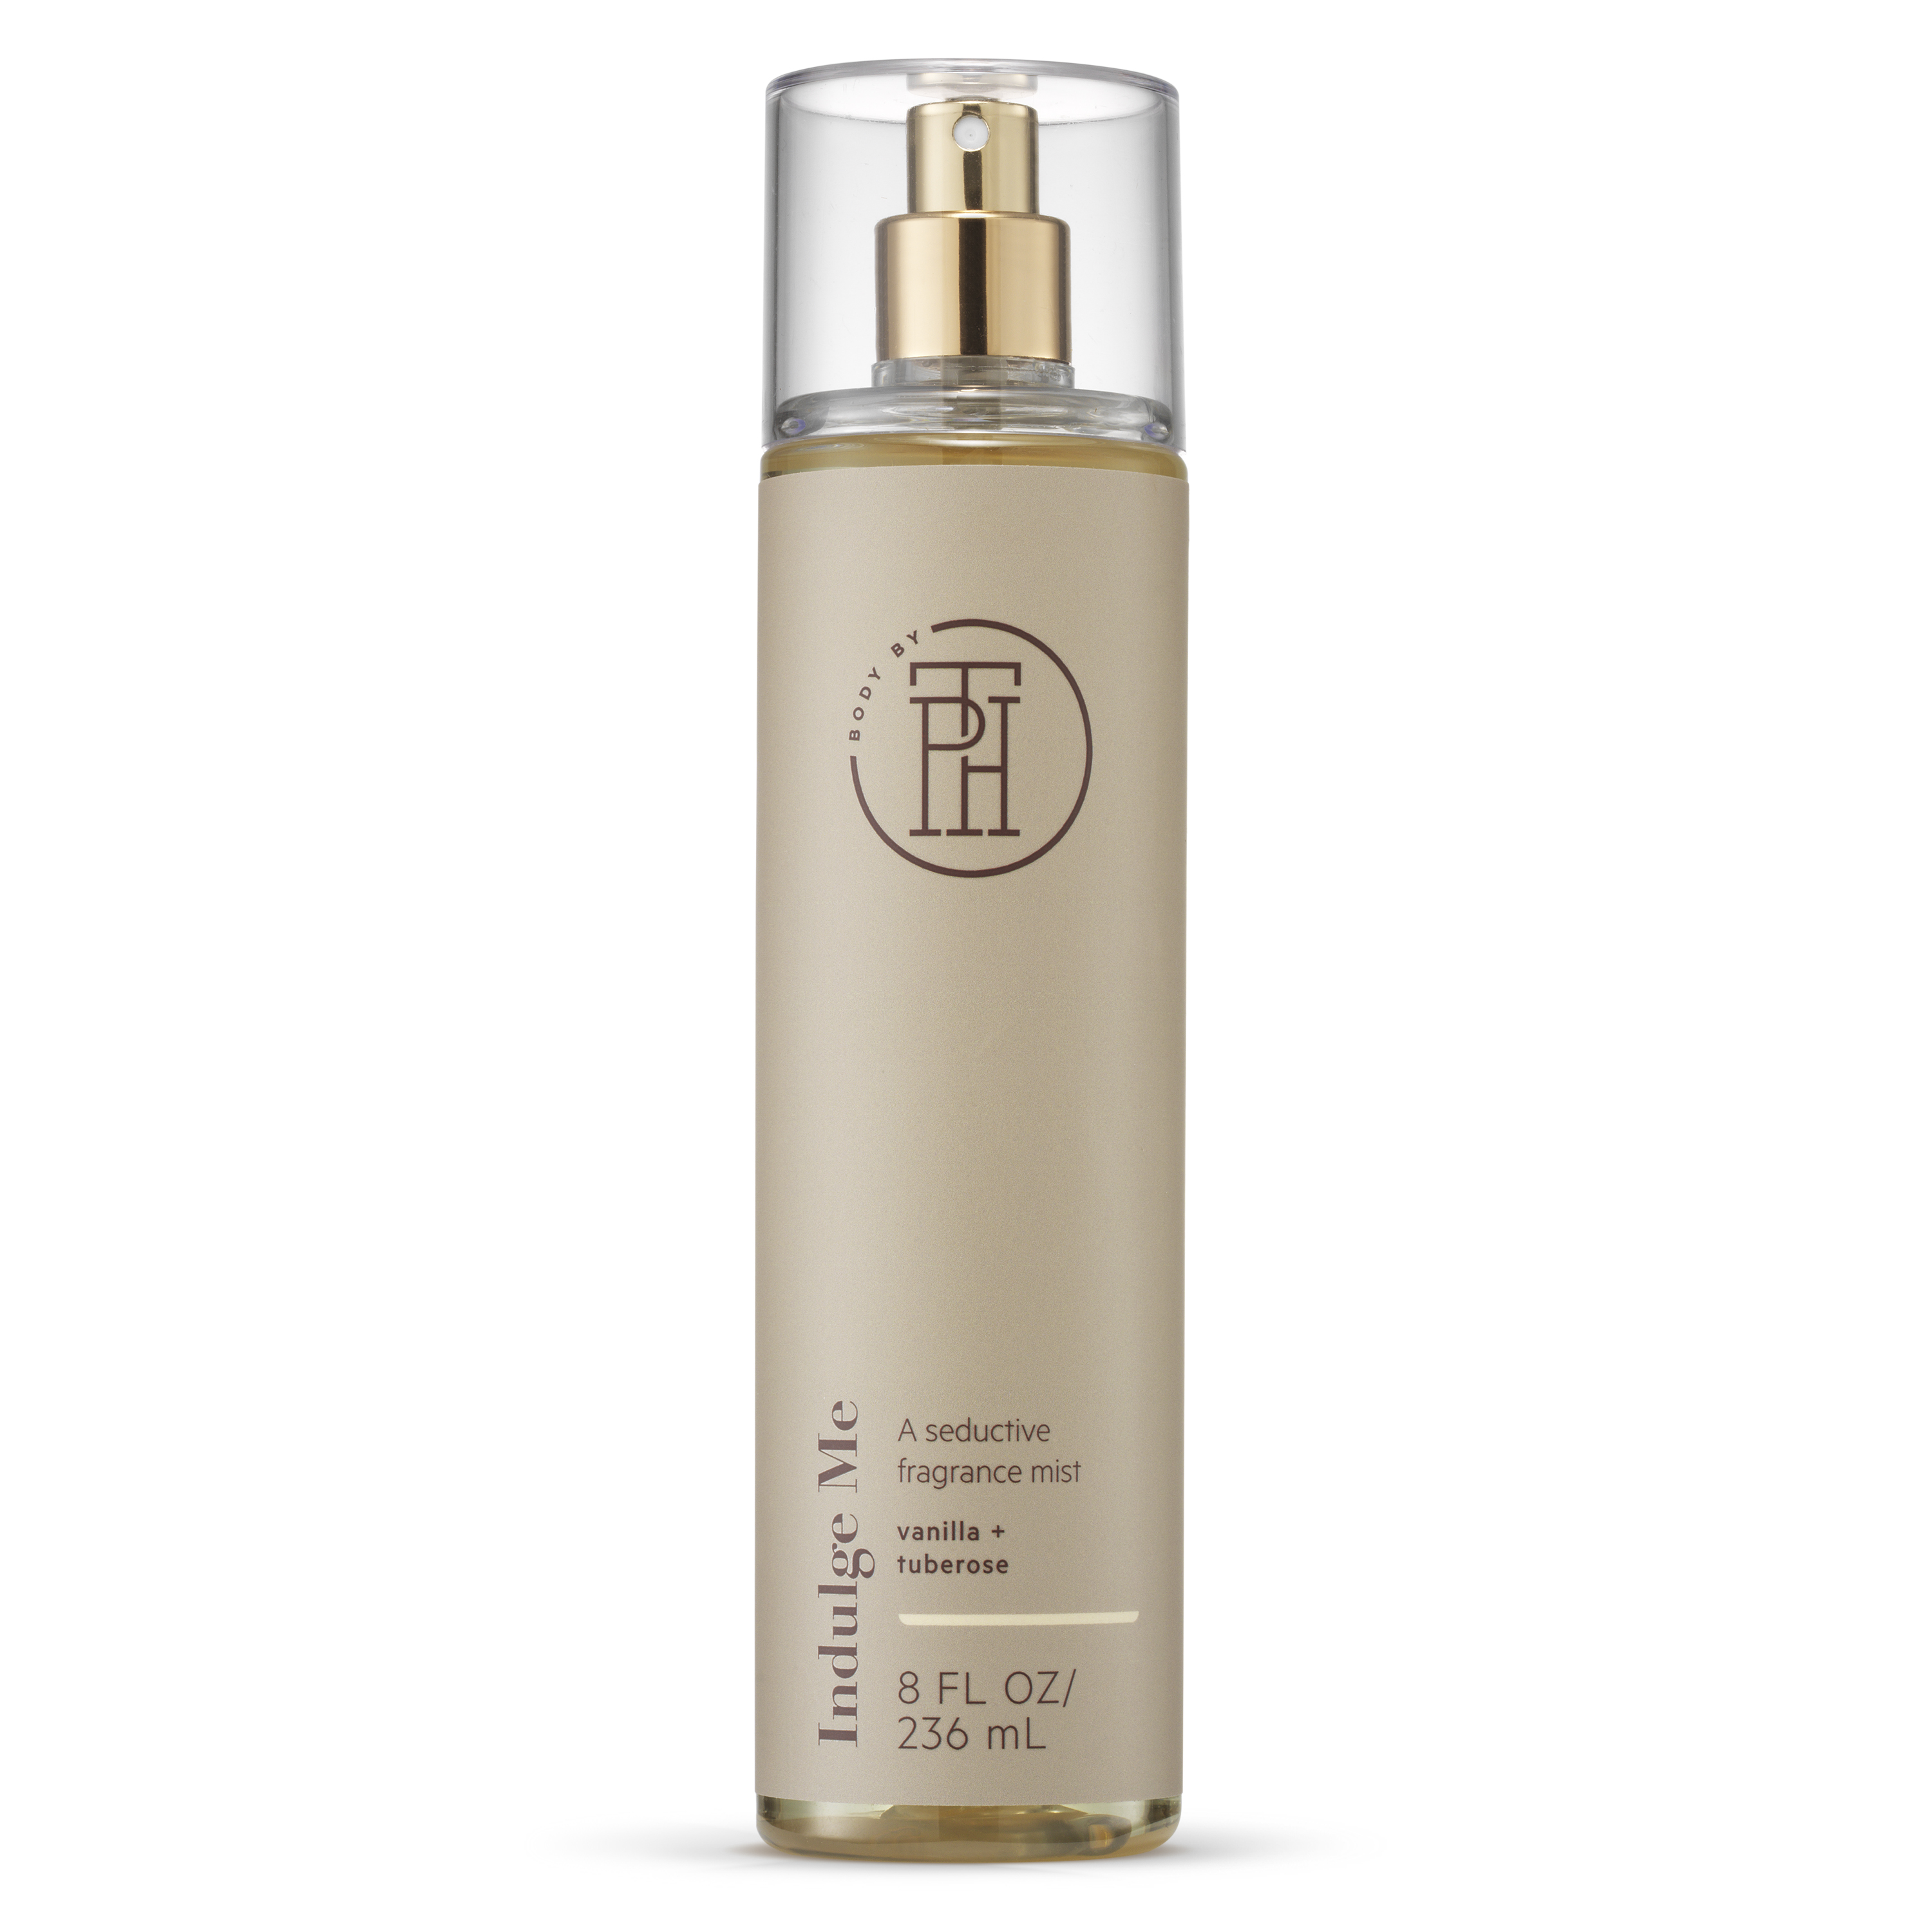 Body by TPH Indulge Me Seductive  Fragrance Mist for Women | Body Spray with Vanilla + Tuberose Notes, 8 fl. oz - image 1 of 4